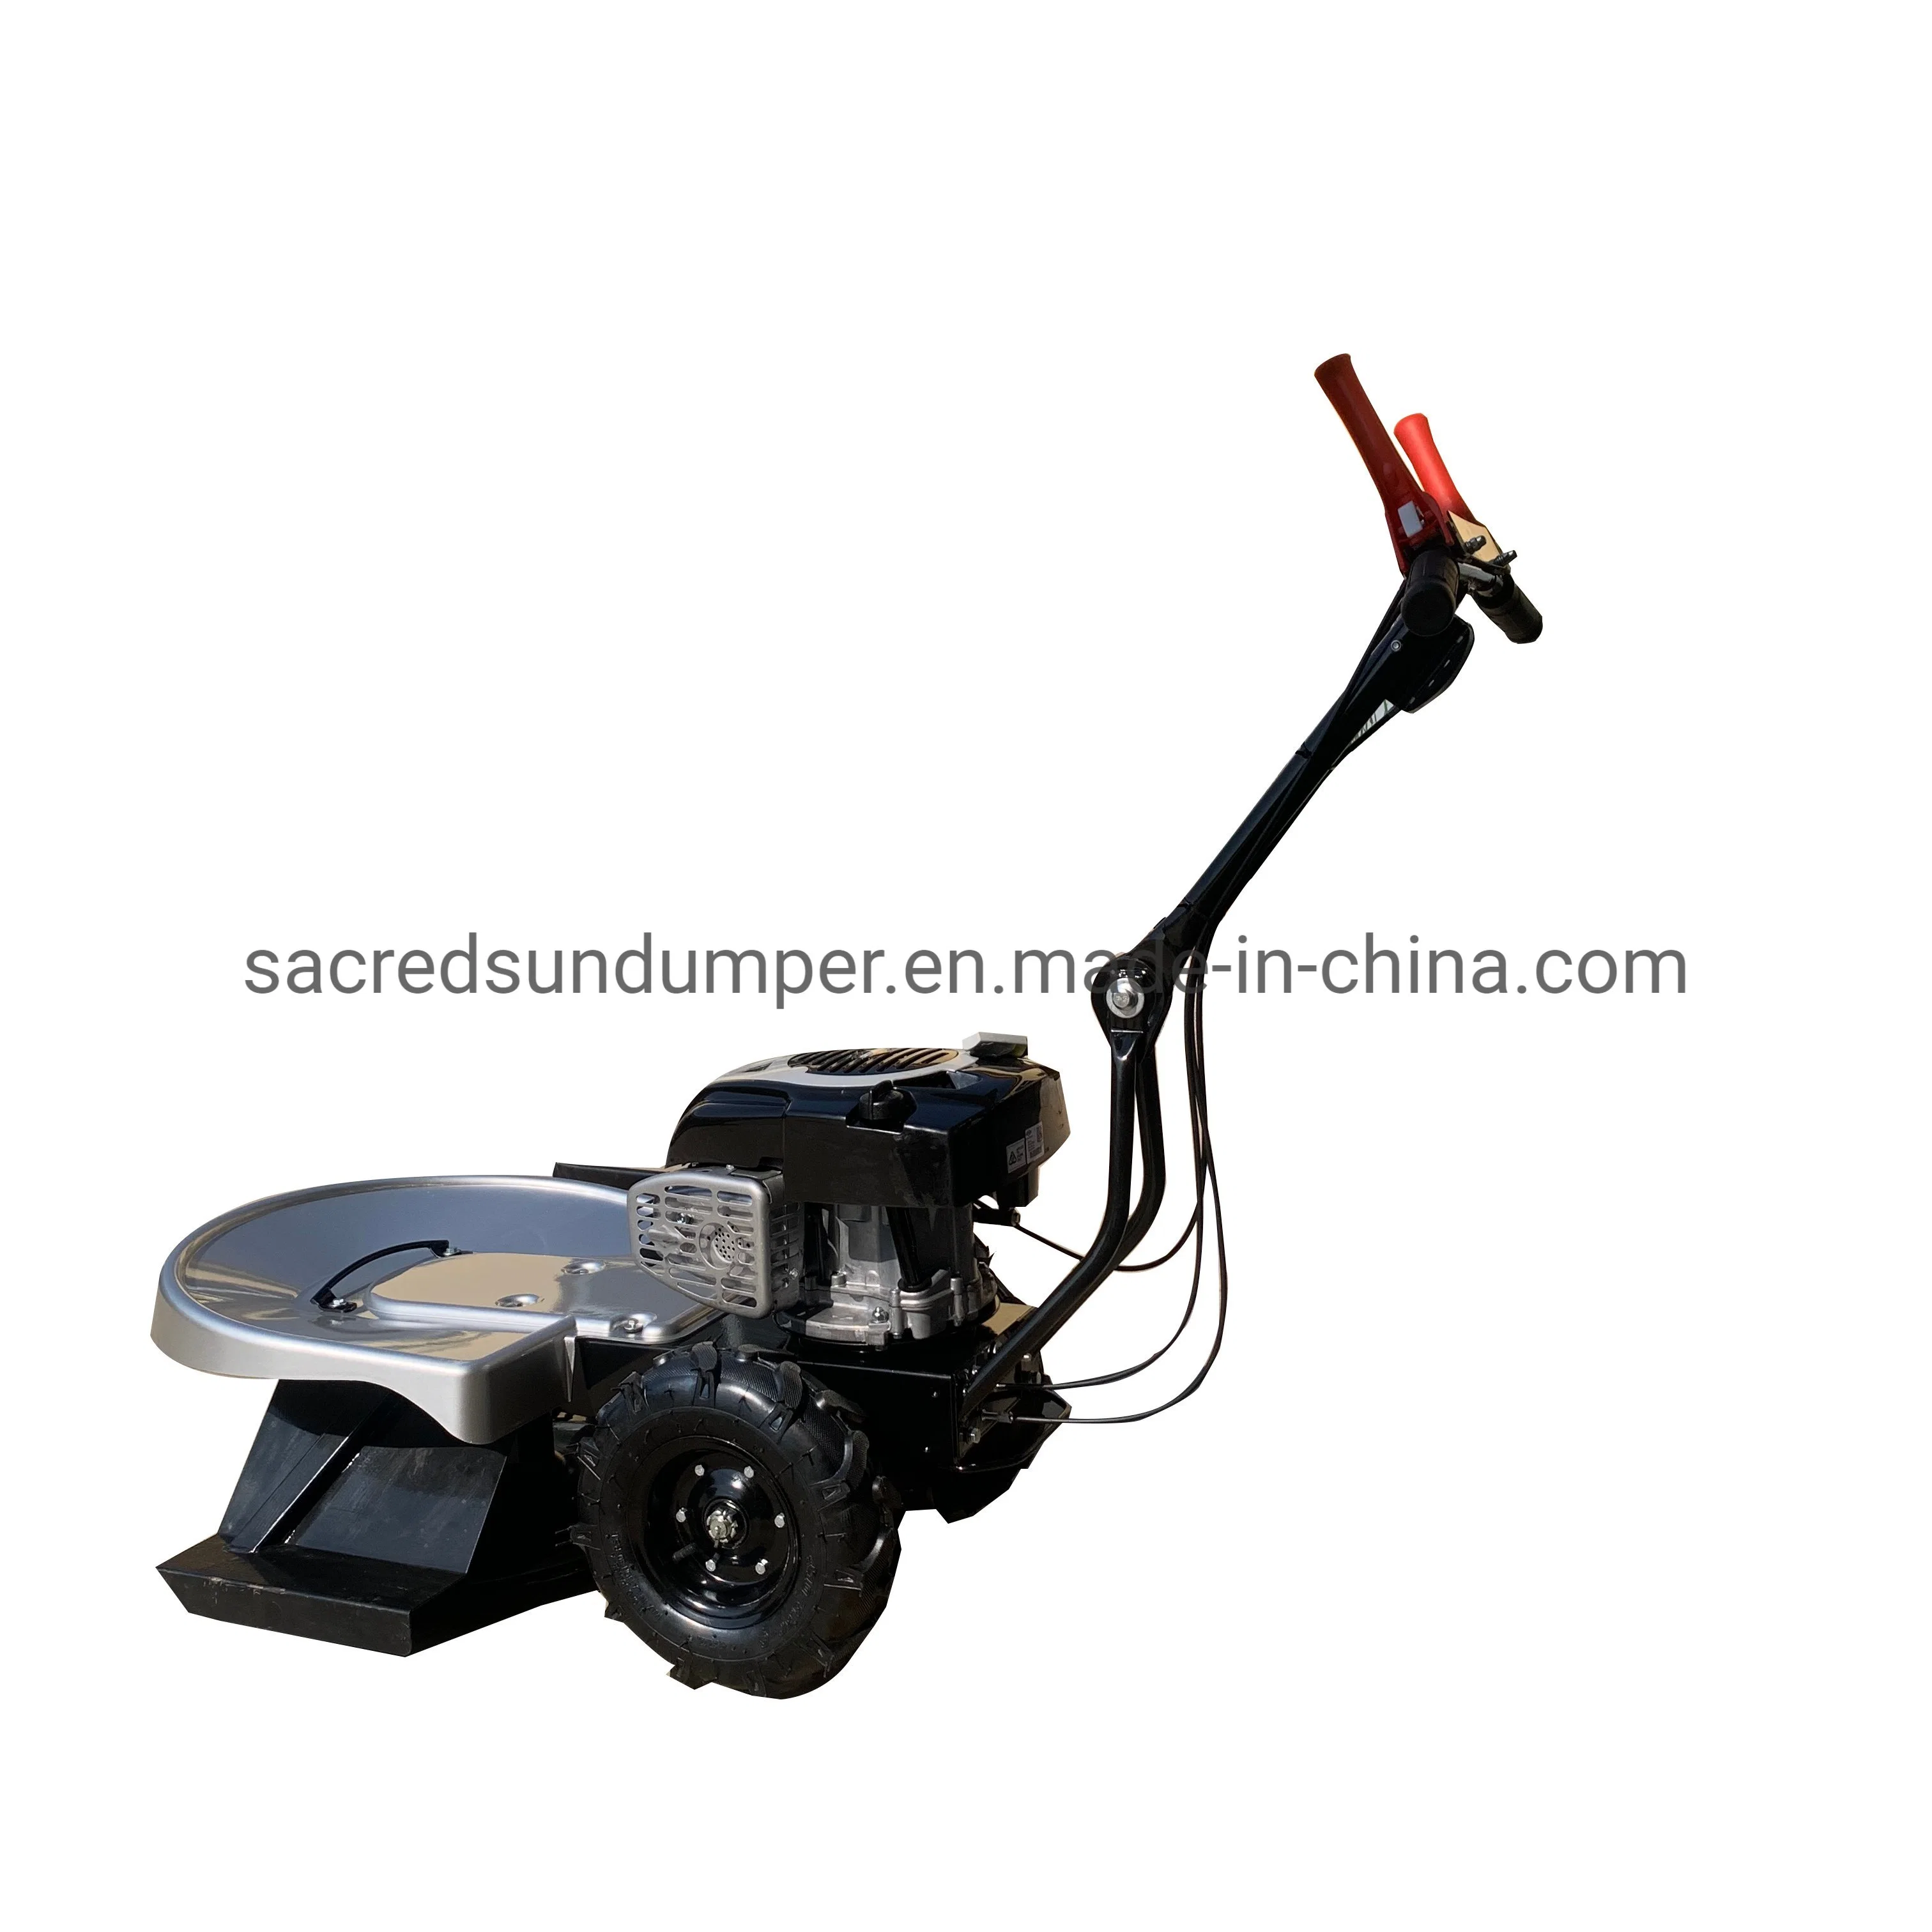 Lawn Mower (Push by Hand) Gasoline Lawnmower Weed Cutter Garden Tool